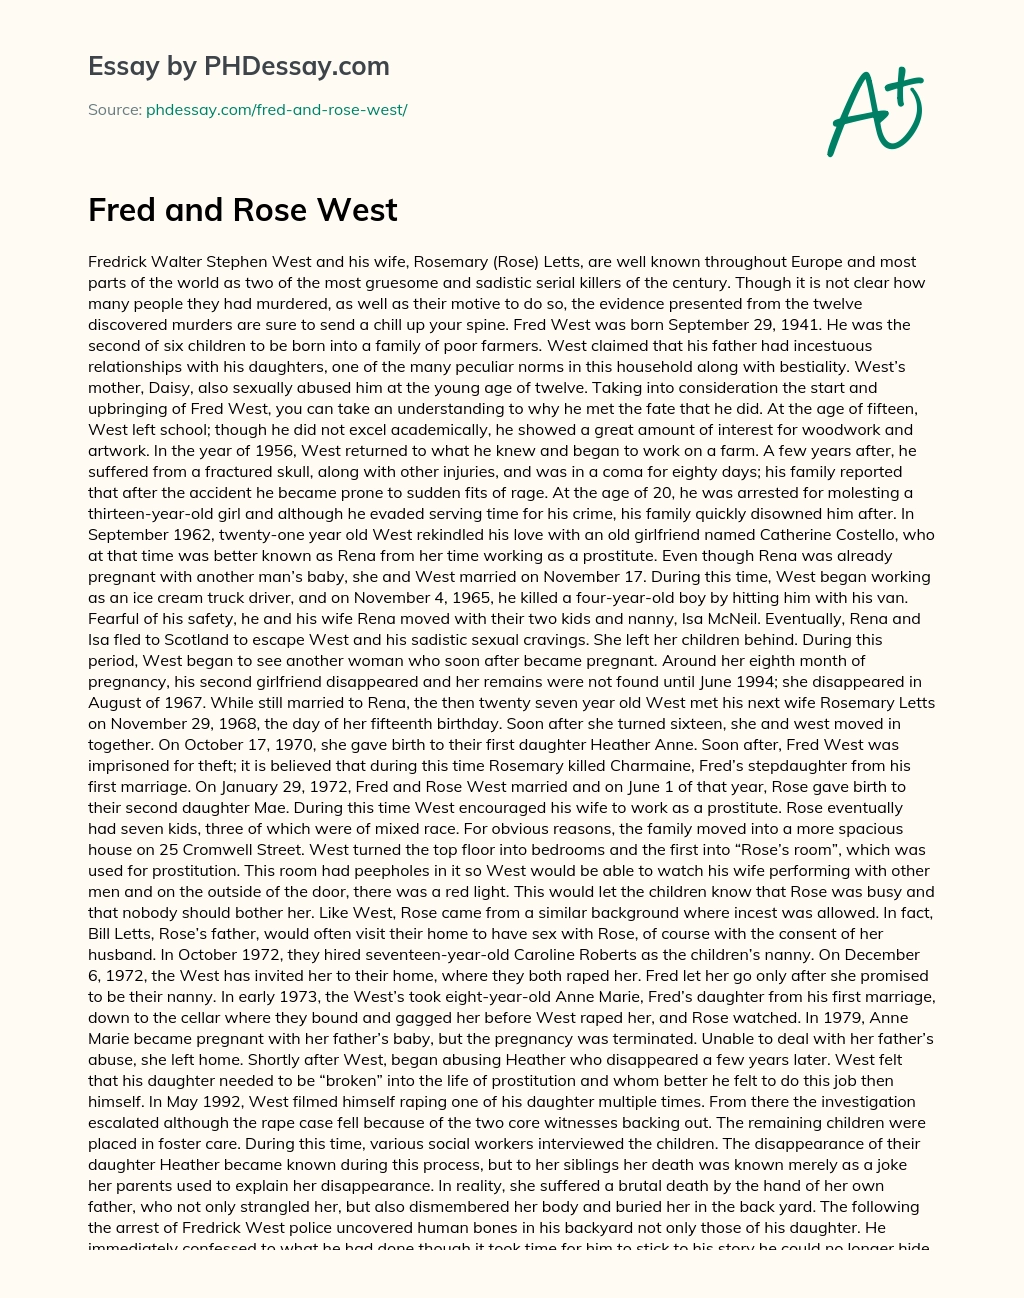 Fred and Rose West essay